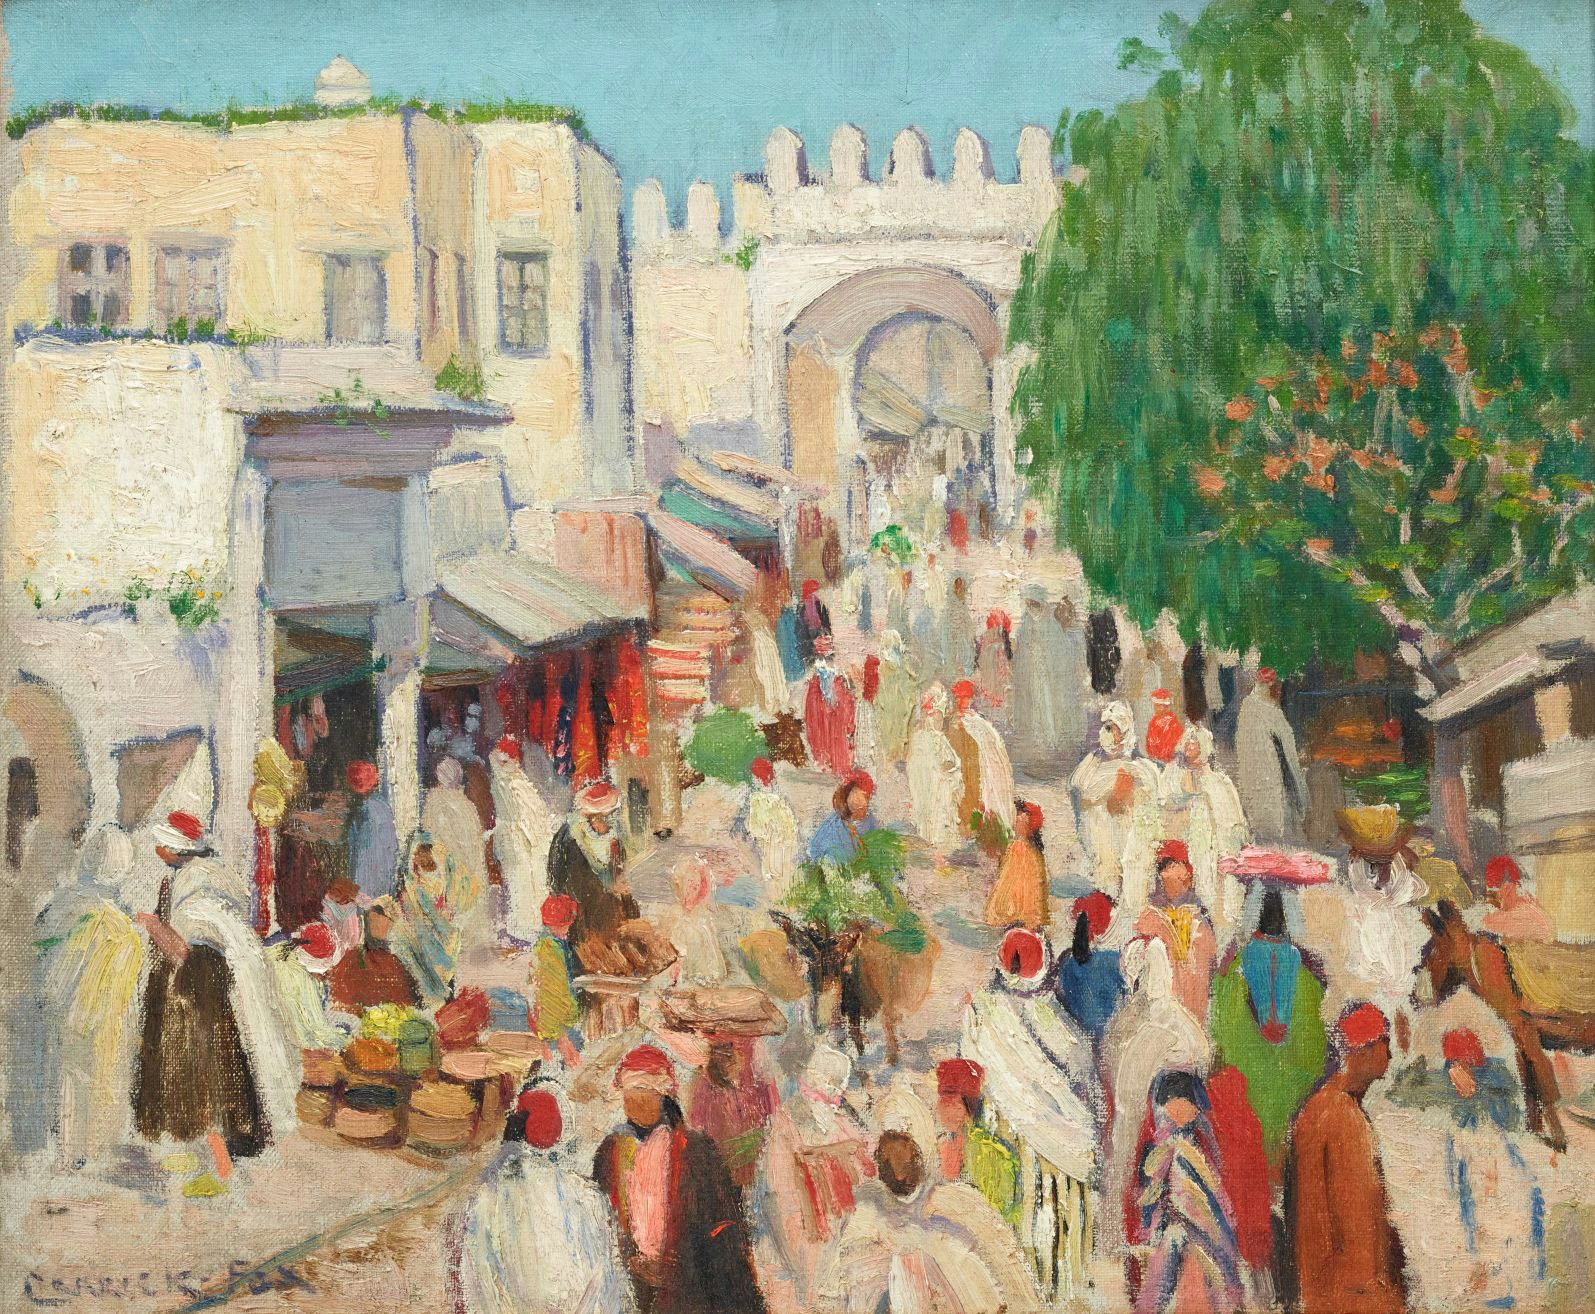 Ethel Carrick A market in Kairouan c1919, Art Gallery of New South Wales